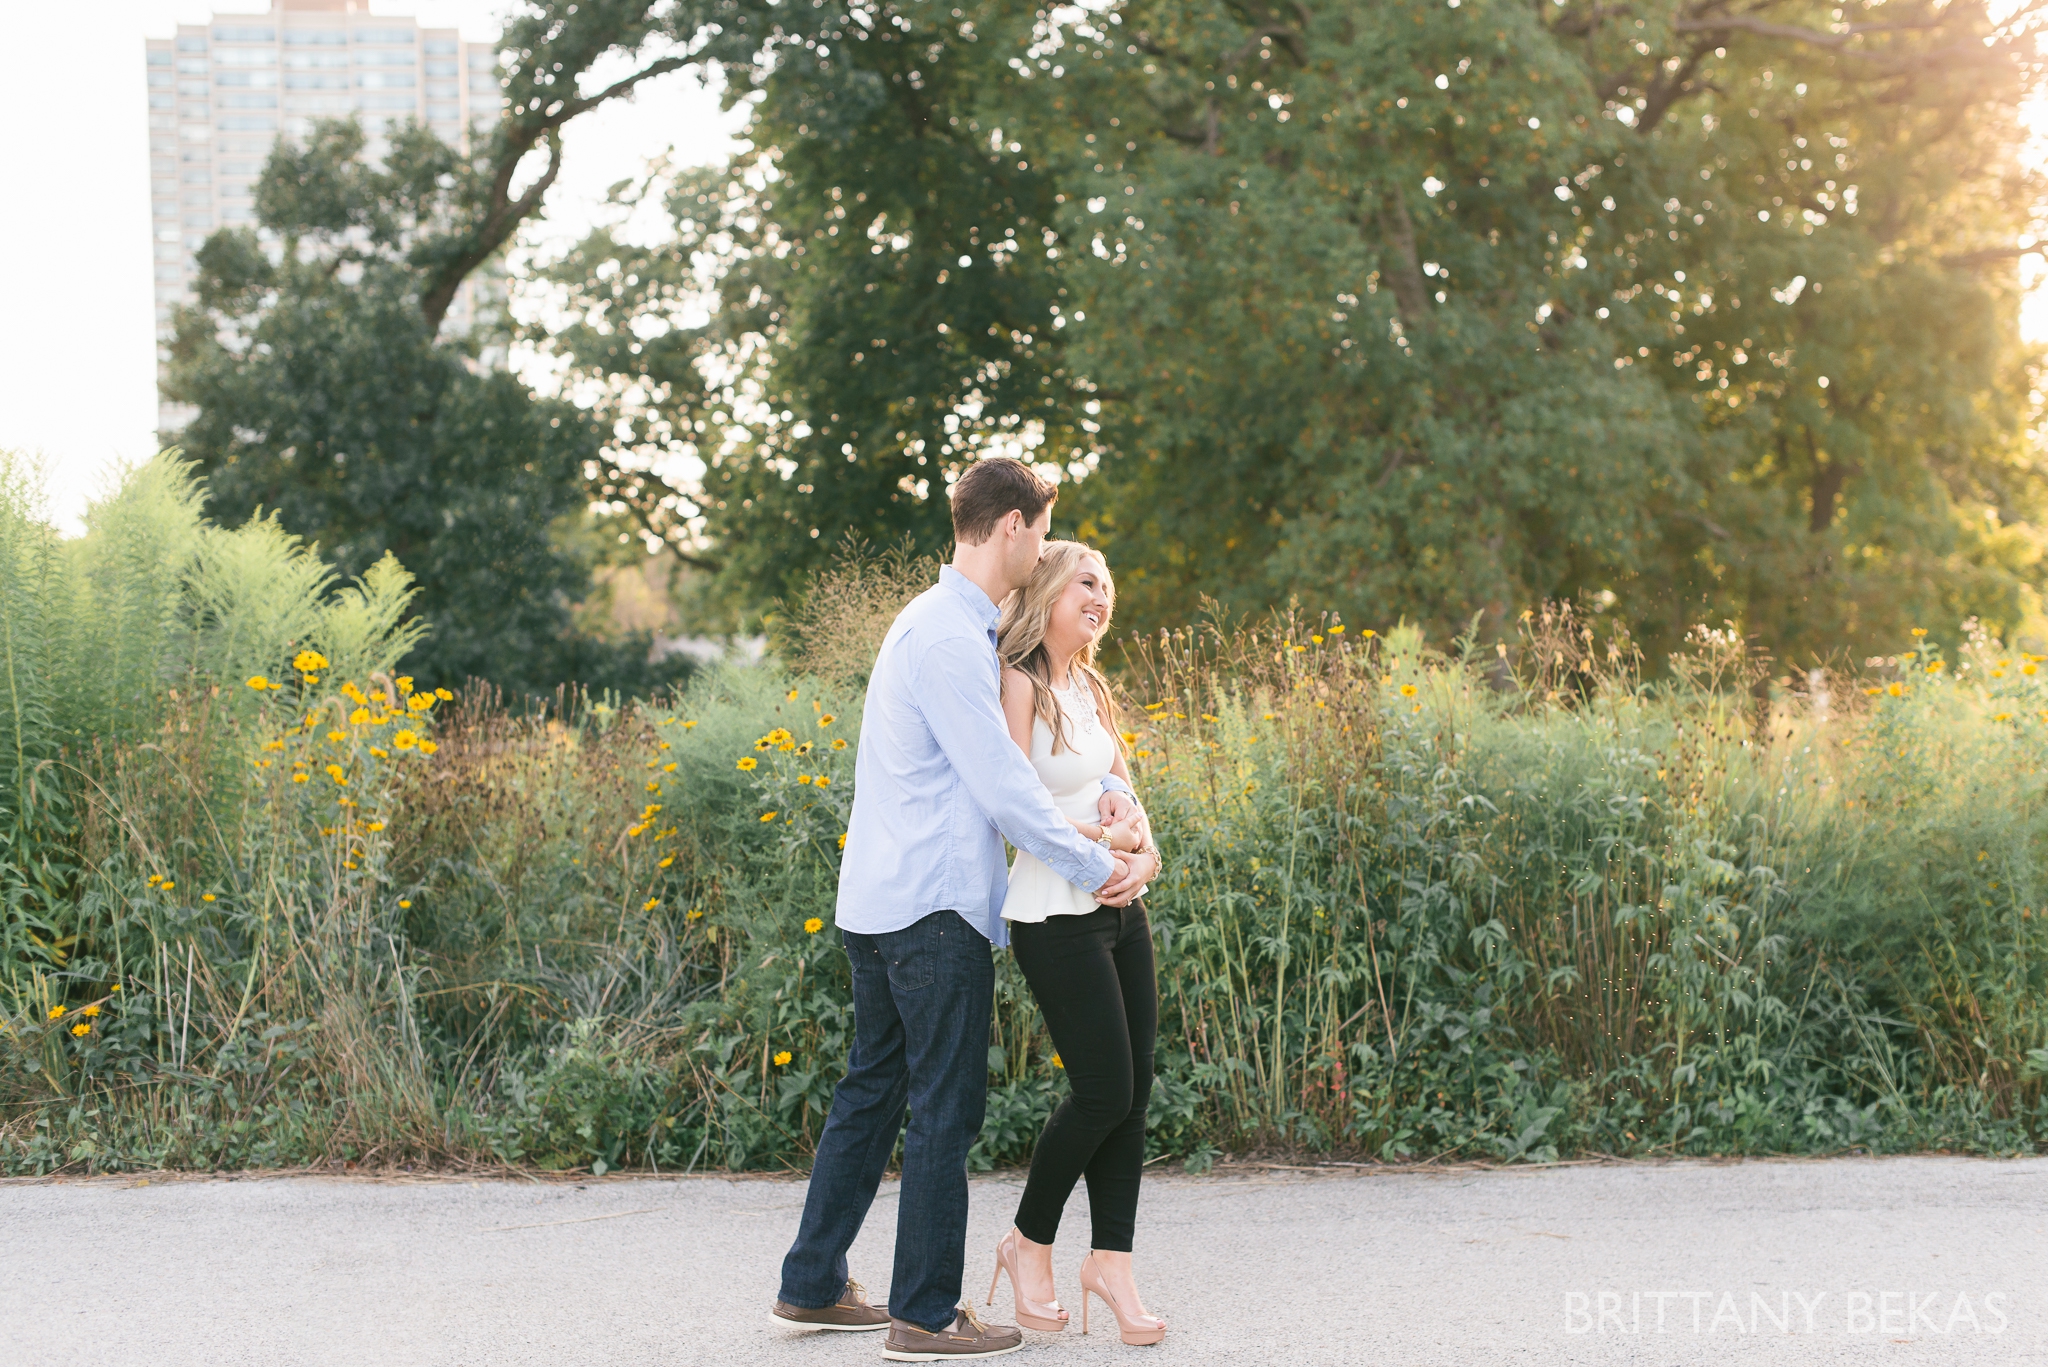 lincoln-park-chicago-engagement-photos-brittany-bekas-photography_0023